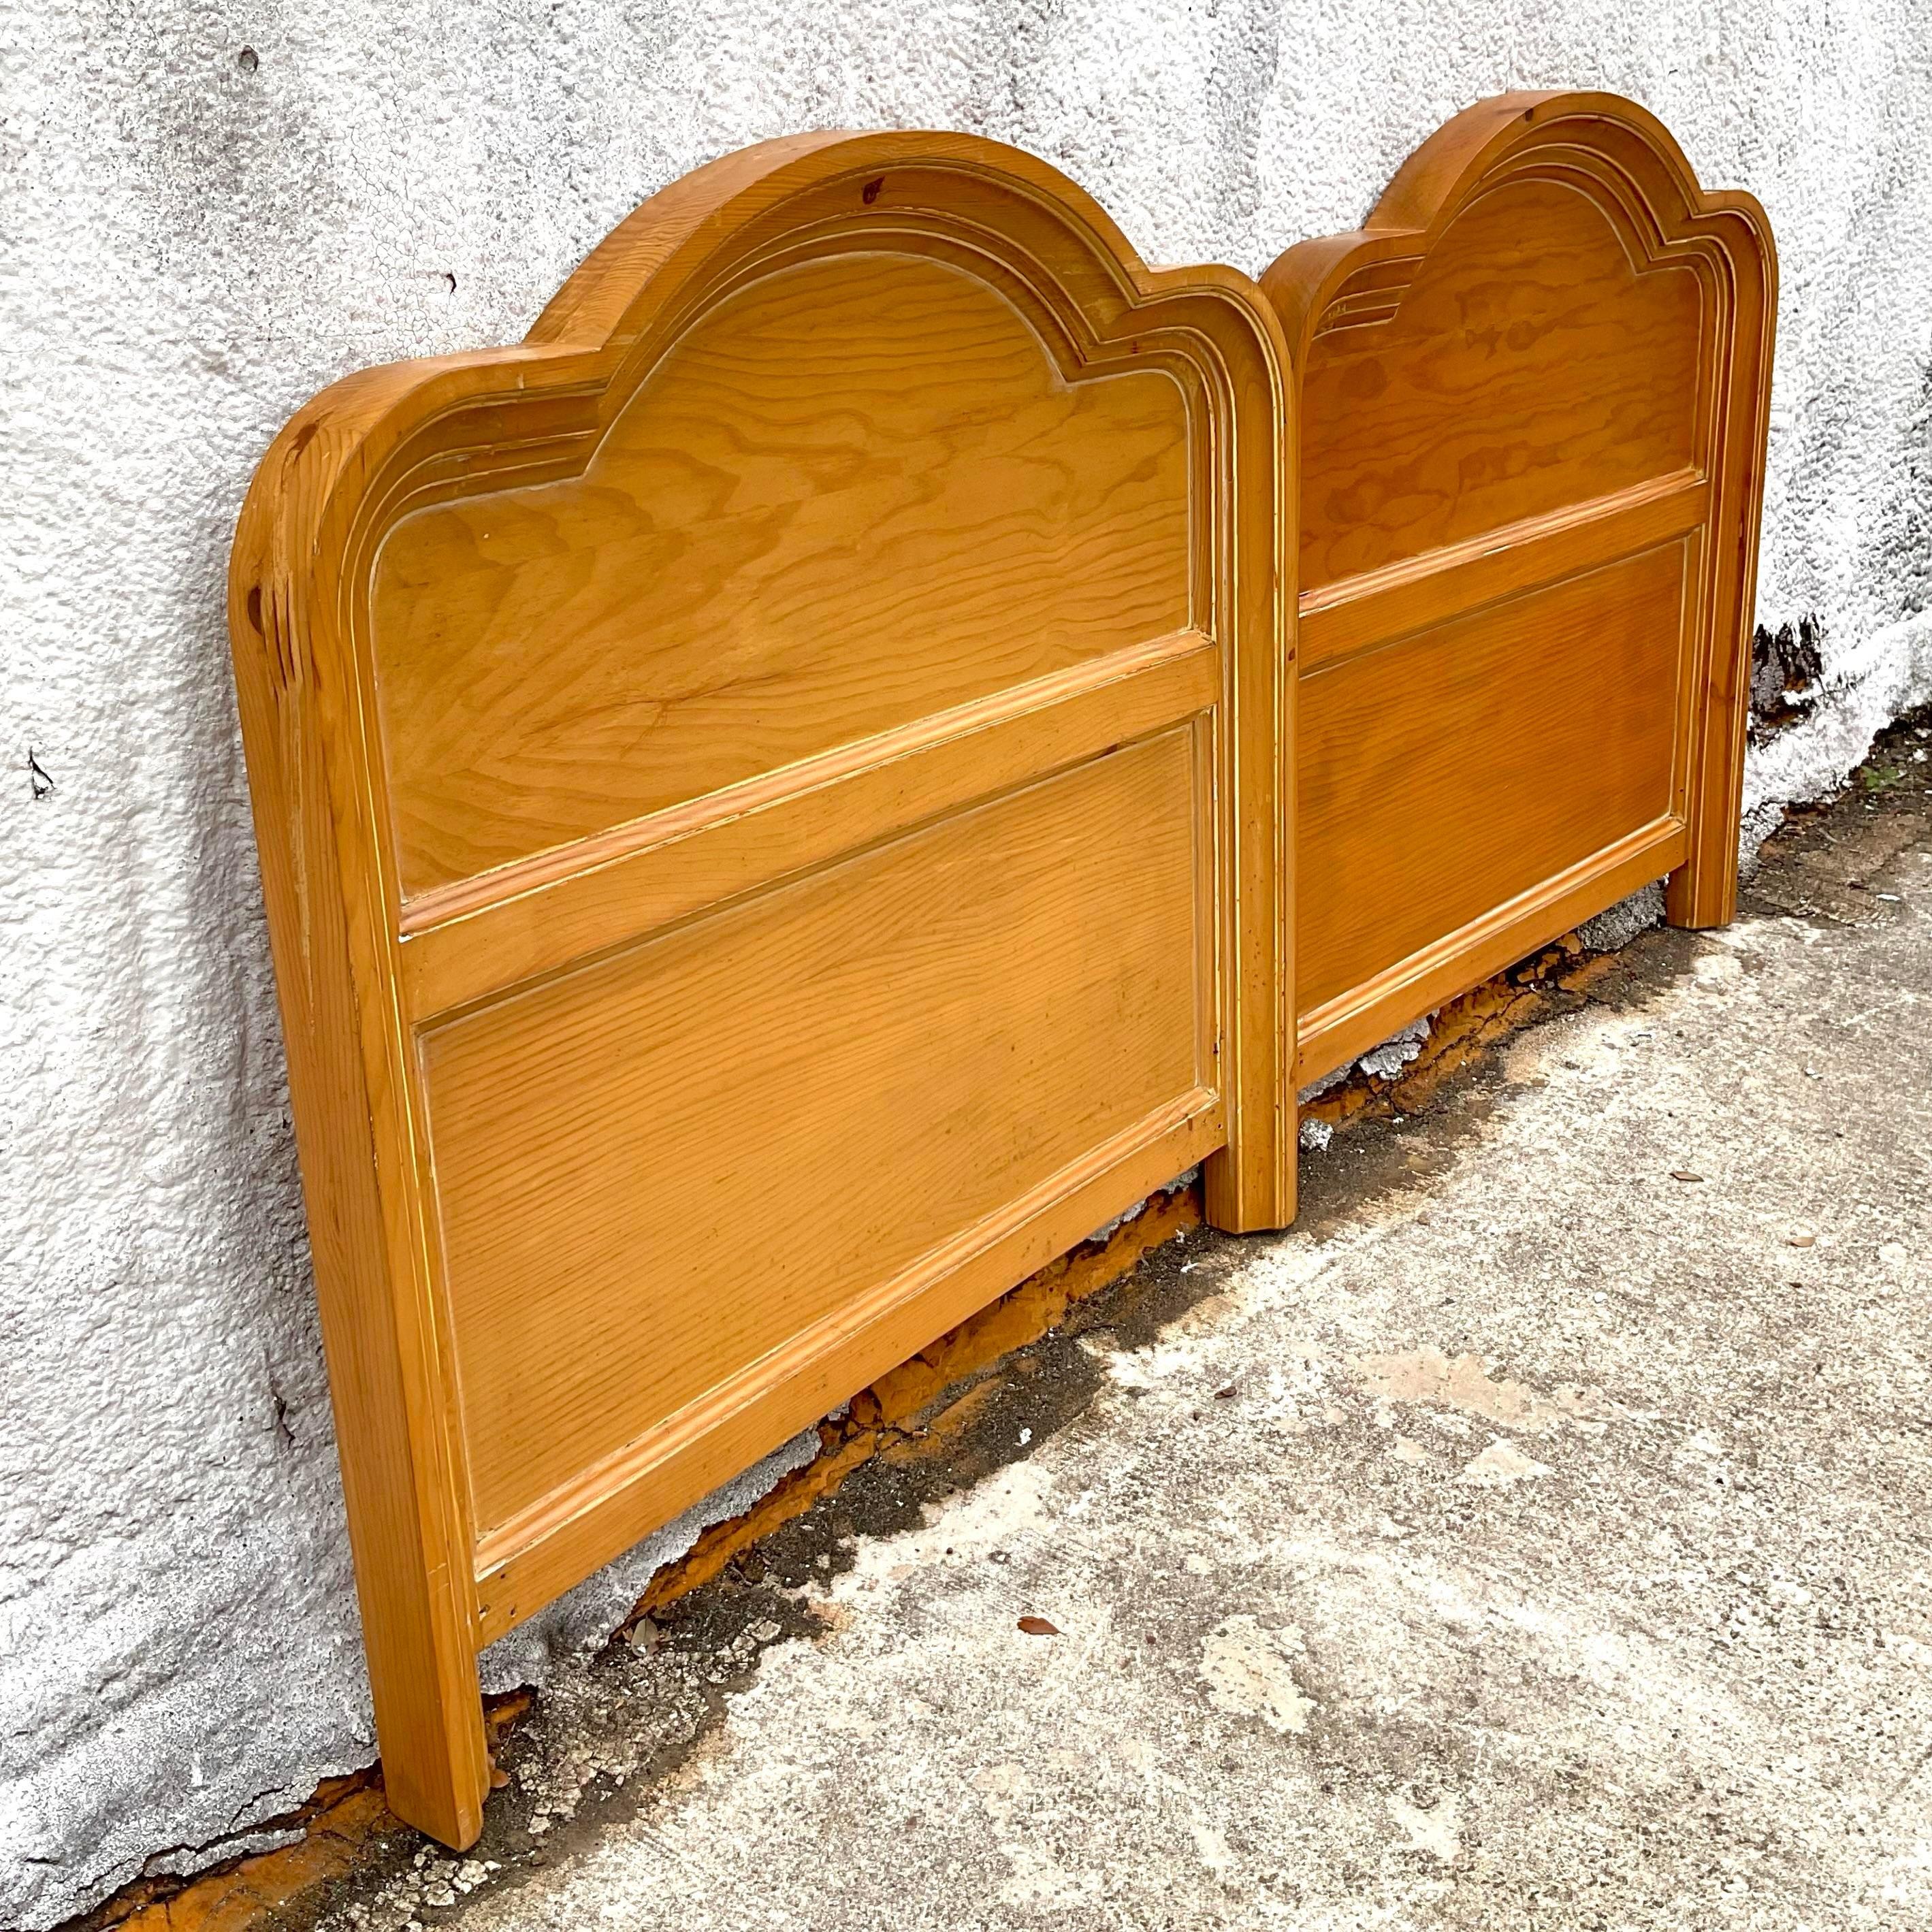 North American Late 20th Century Vintage Wooden Trim Detailed Twin Headboards - A Pair For Sale